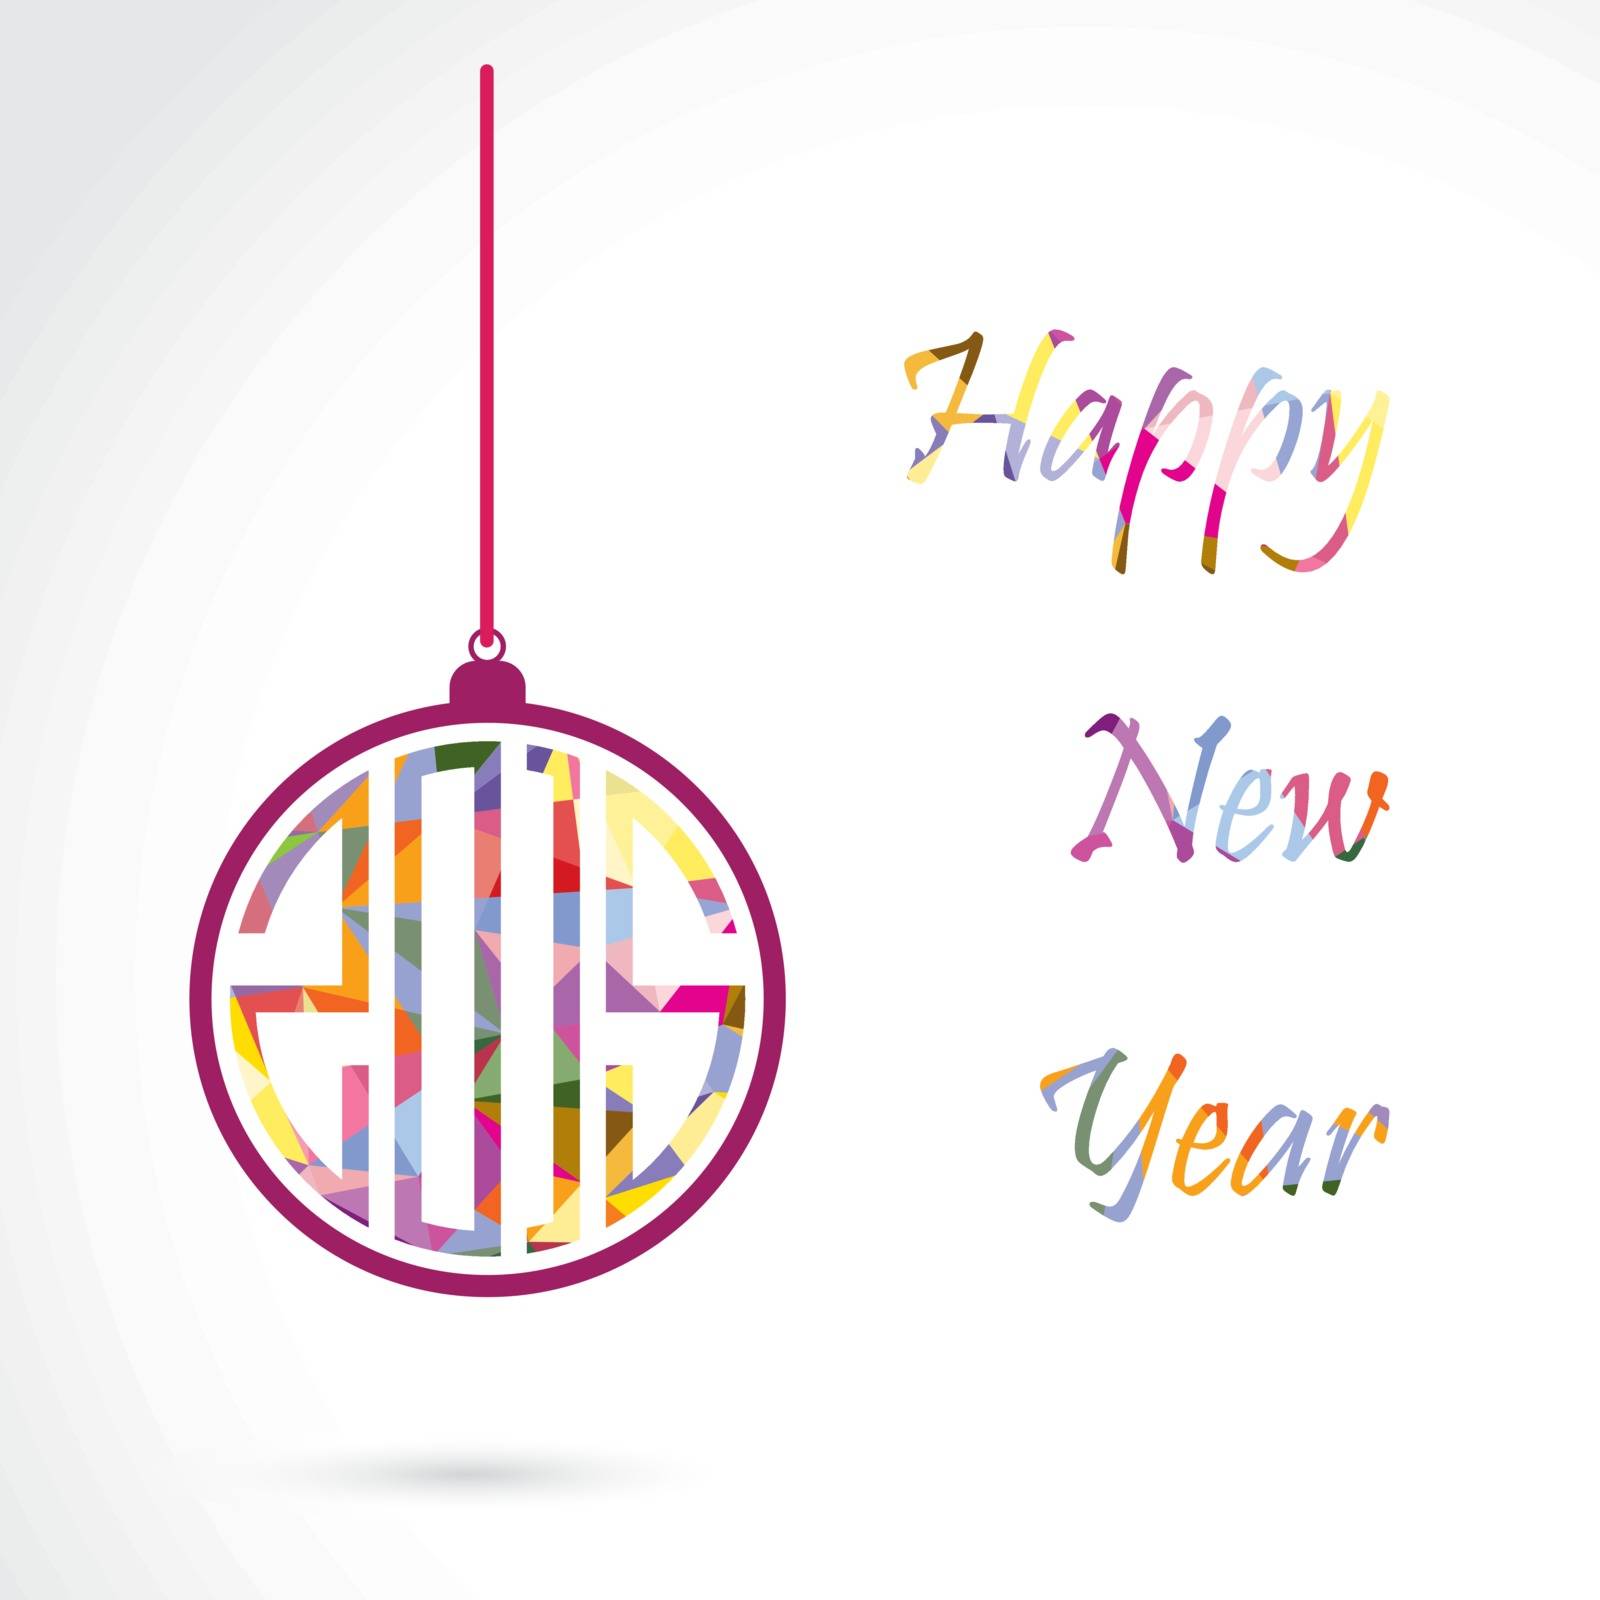 Happy new year 2015 creative greeting card by chatchai5172